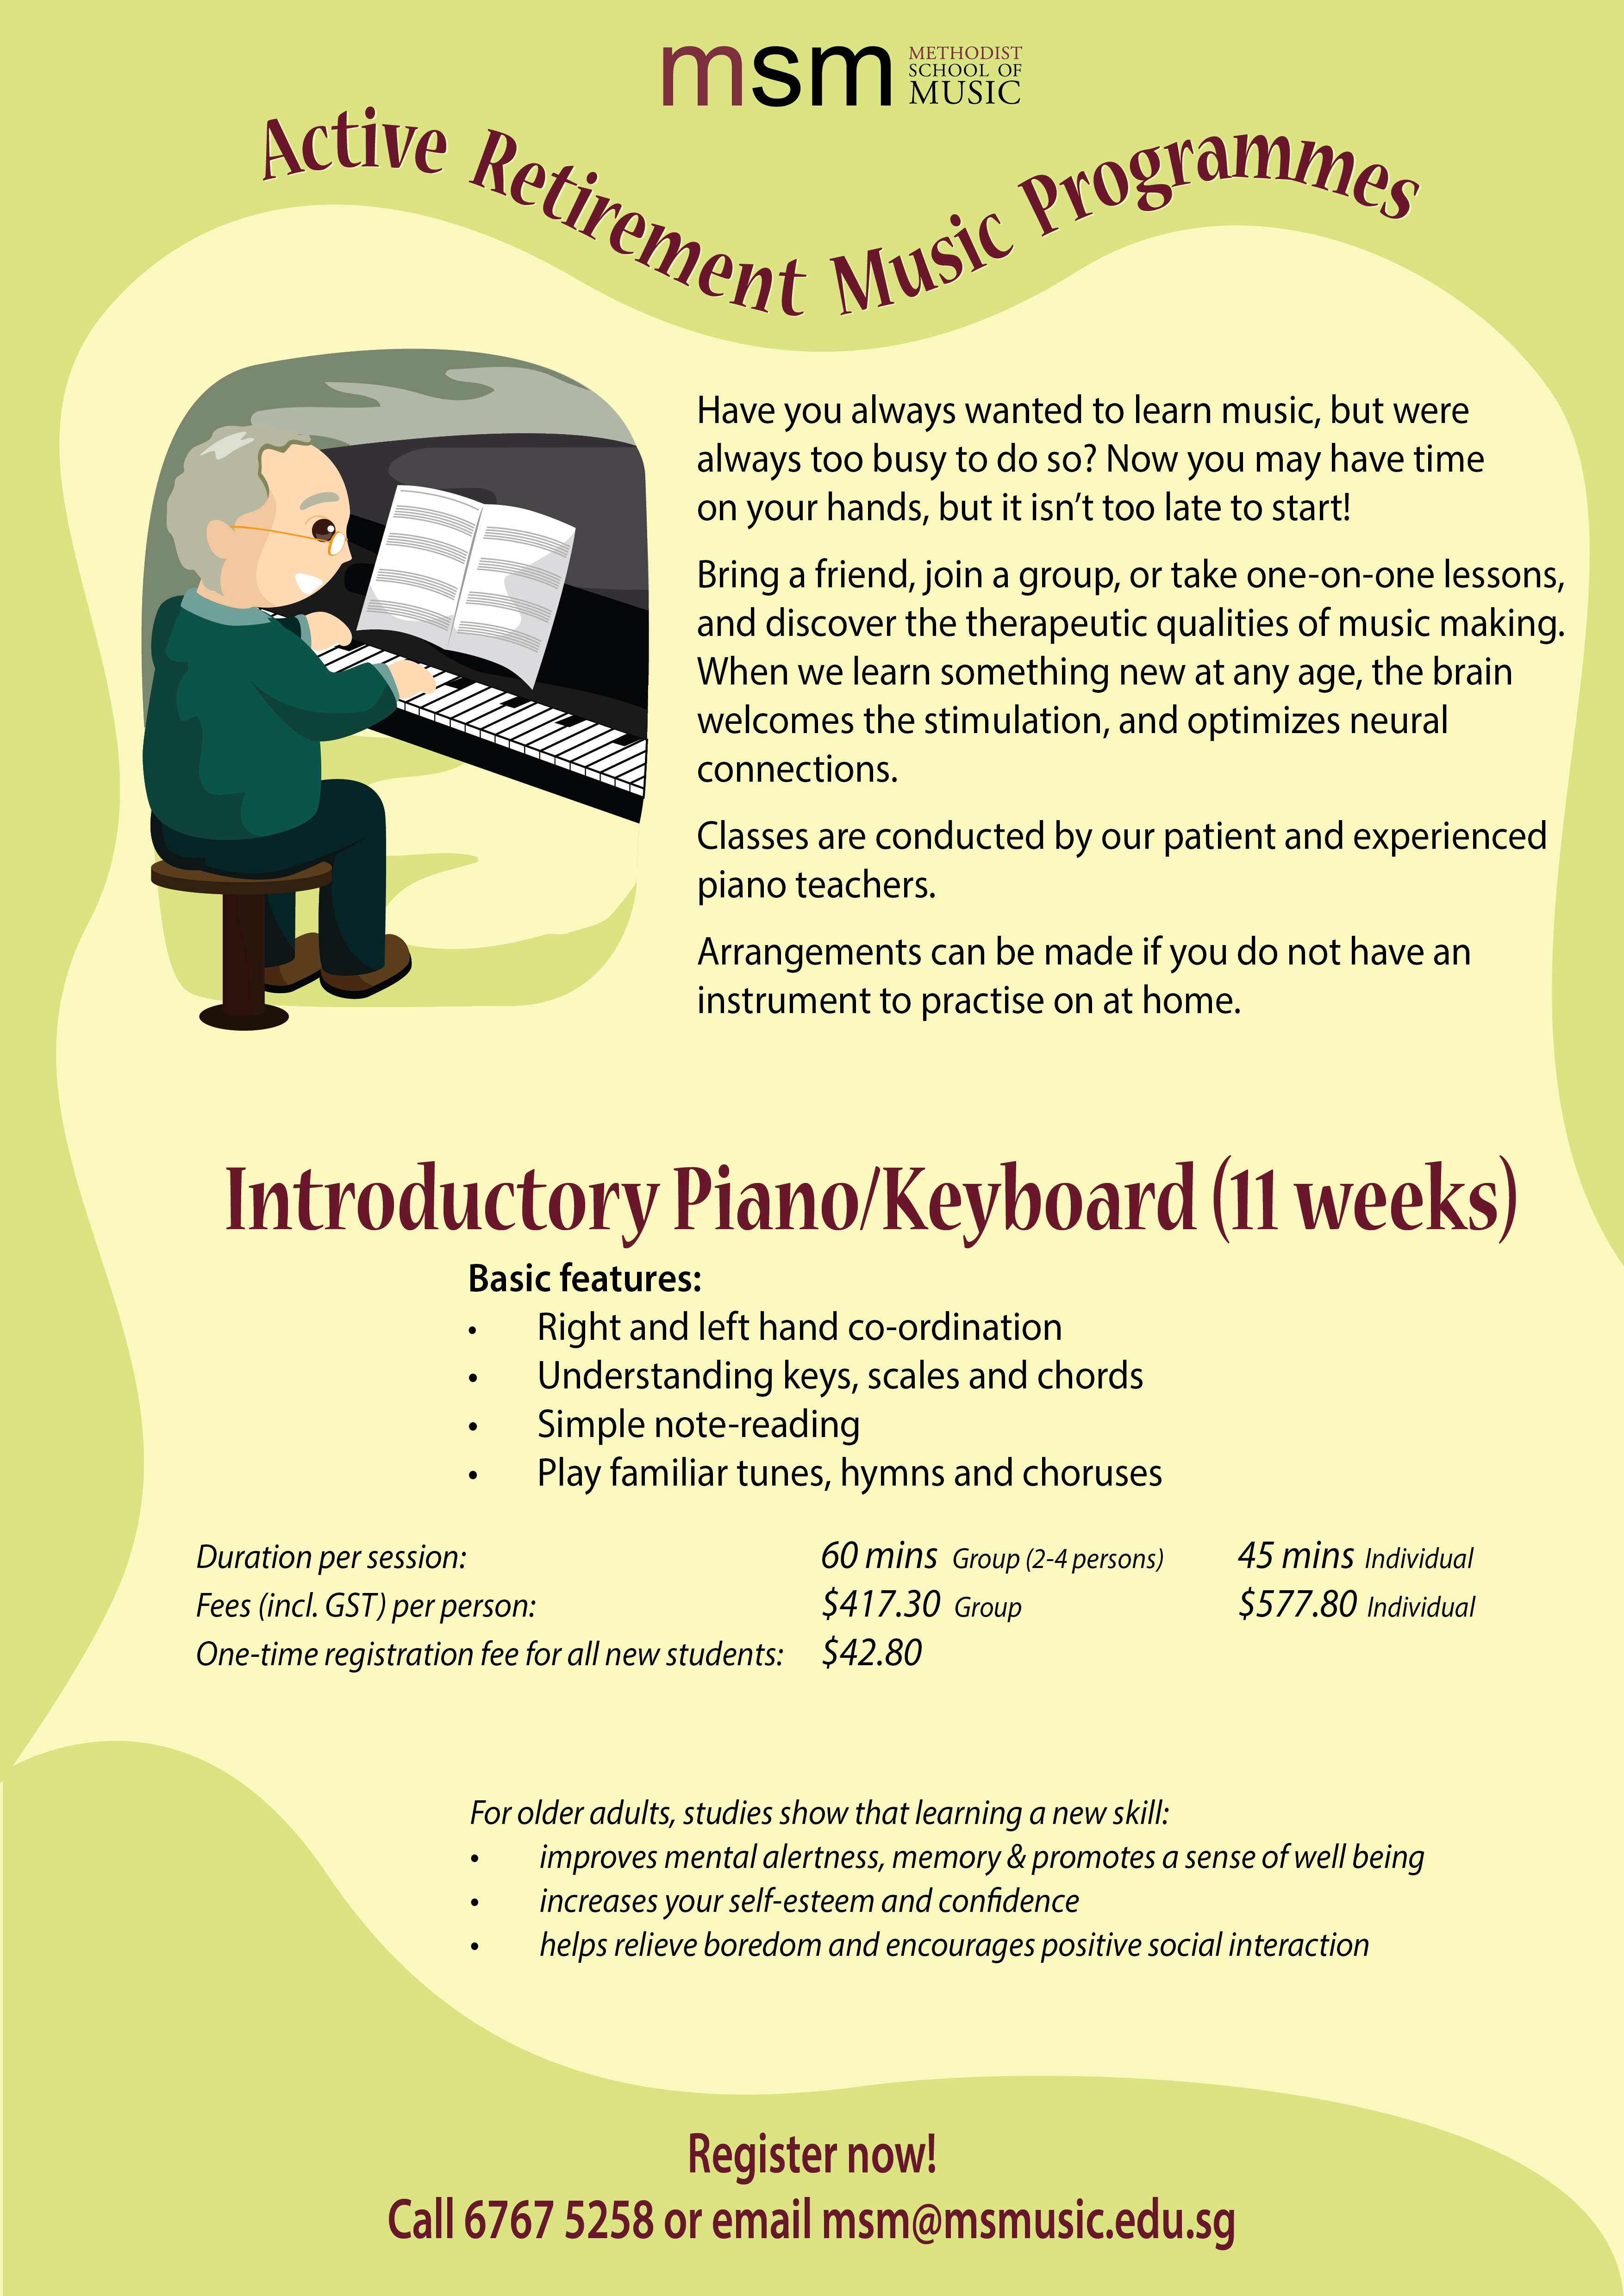 Introductory Piano/Keyboard Course